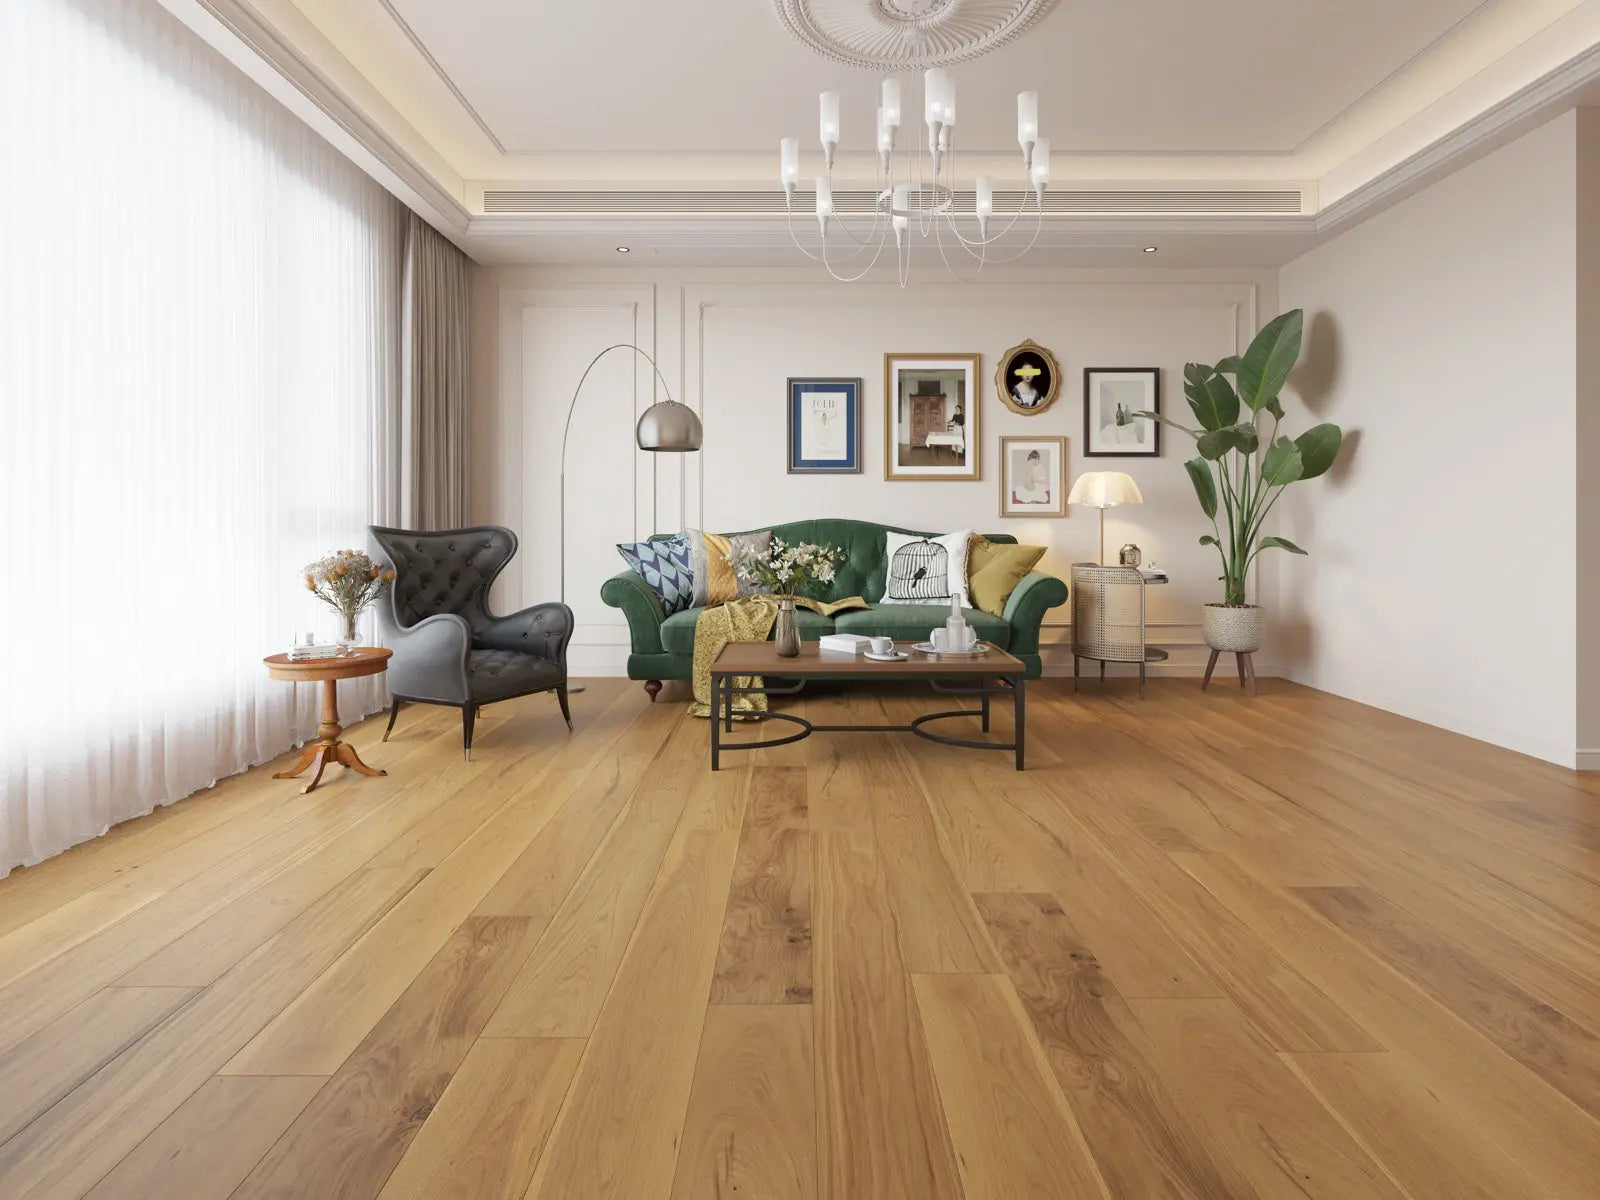 MSW71 Oak Woodland Oak 3/8 x 6-1/2" Wire Brushed Engineered- Call 844-356-6711 for BEST price! MW floors